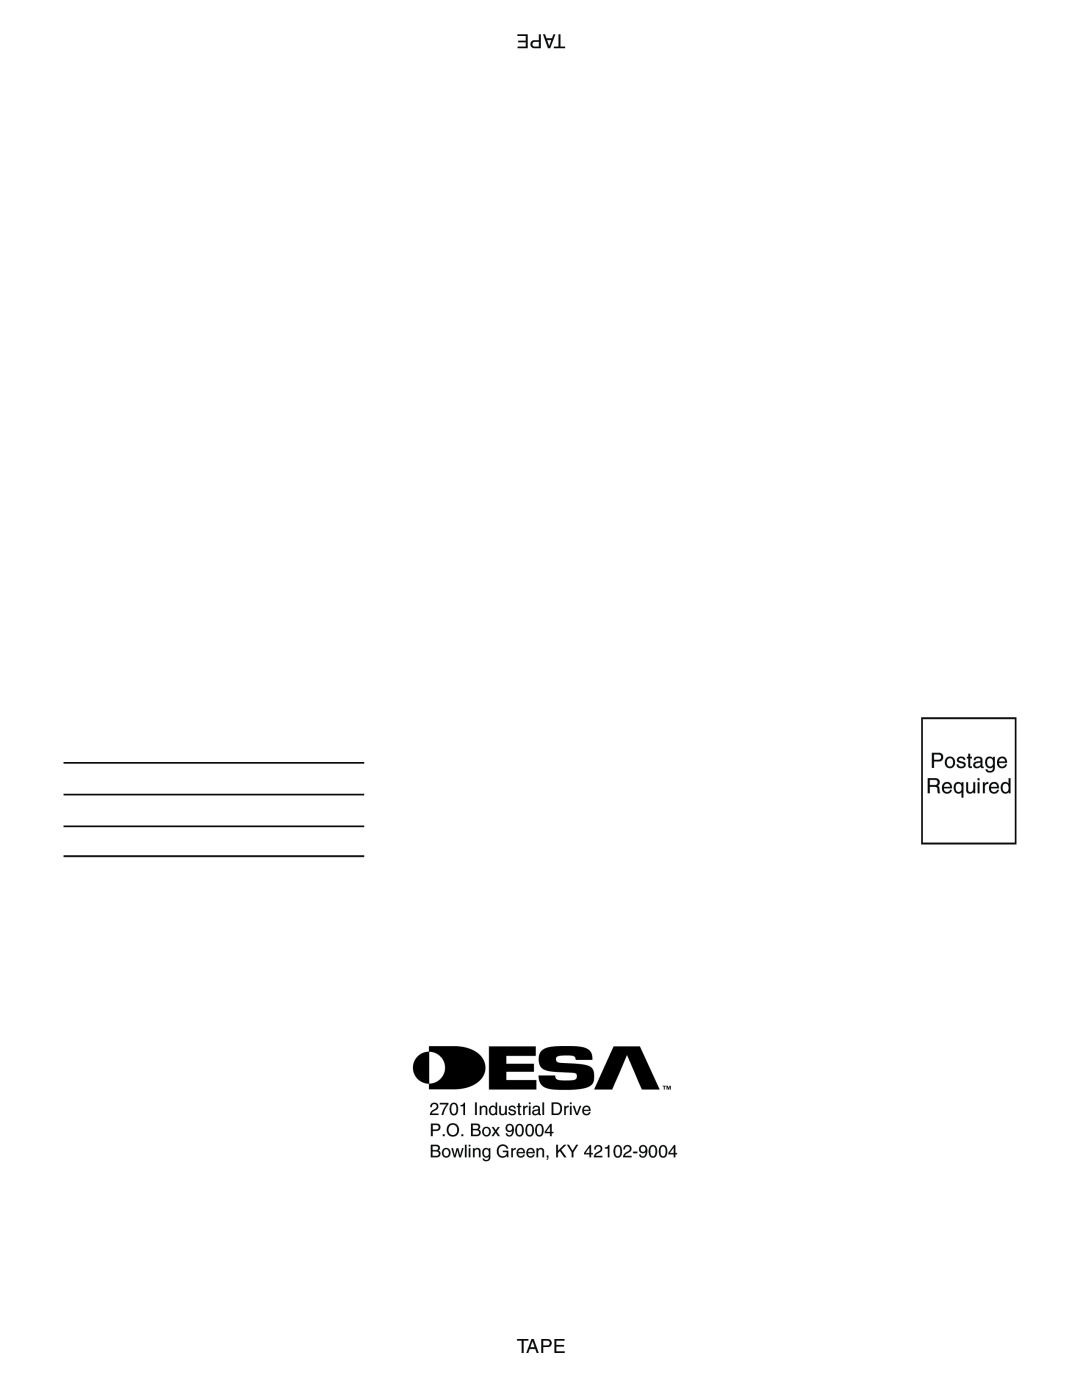 Desa CHDV42NR-B, V42P-A, V42N-A, VV42NB(1), VV42PB(1) installation manual Postage Required, For..com, Tape, 111906-01E 